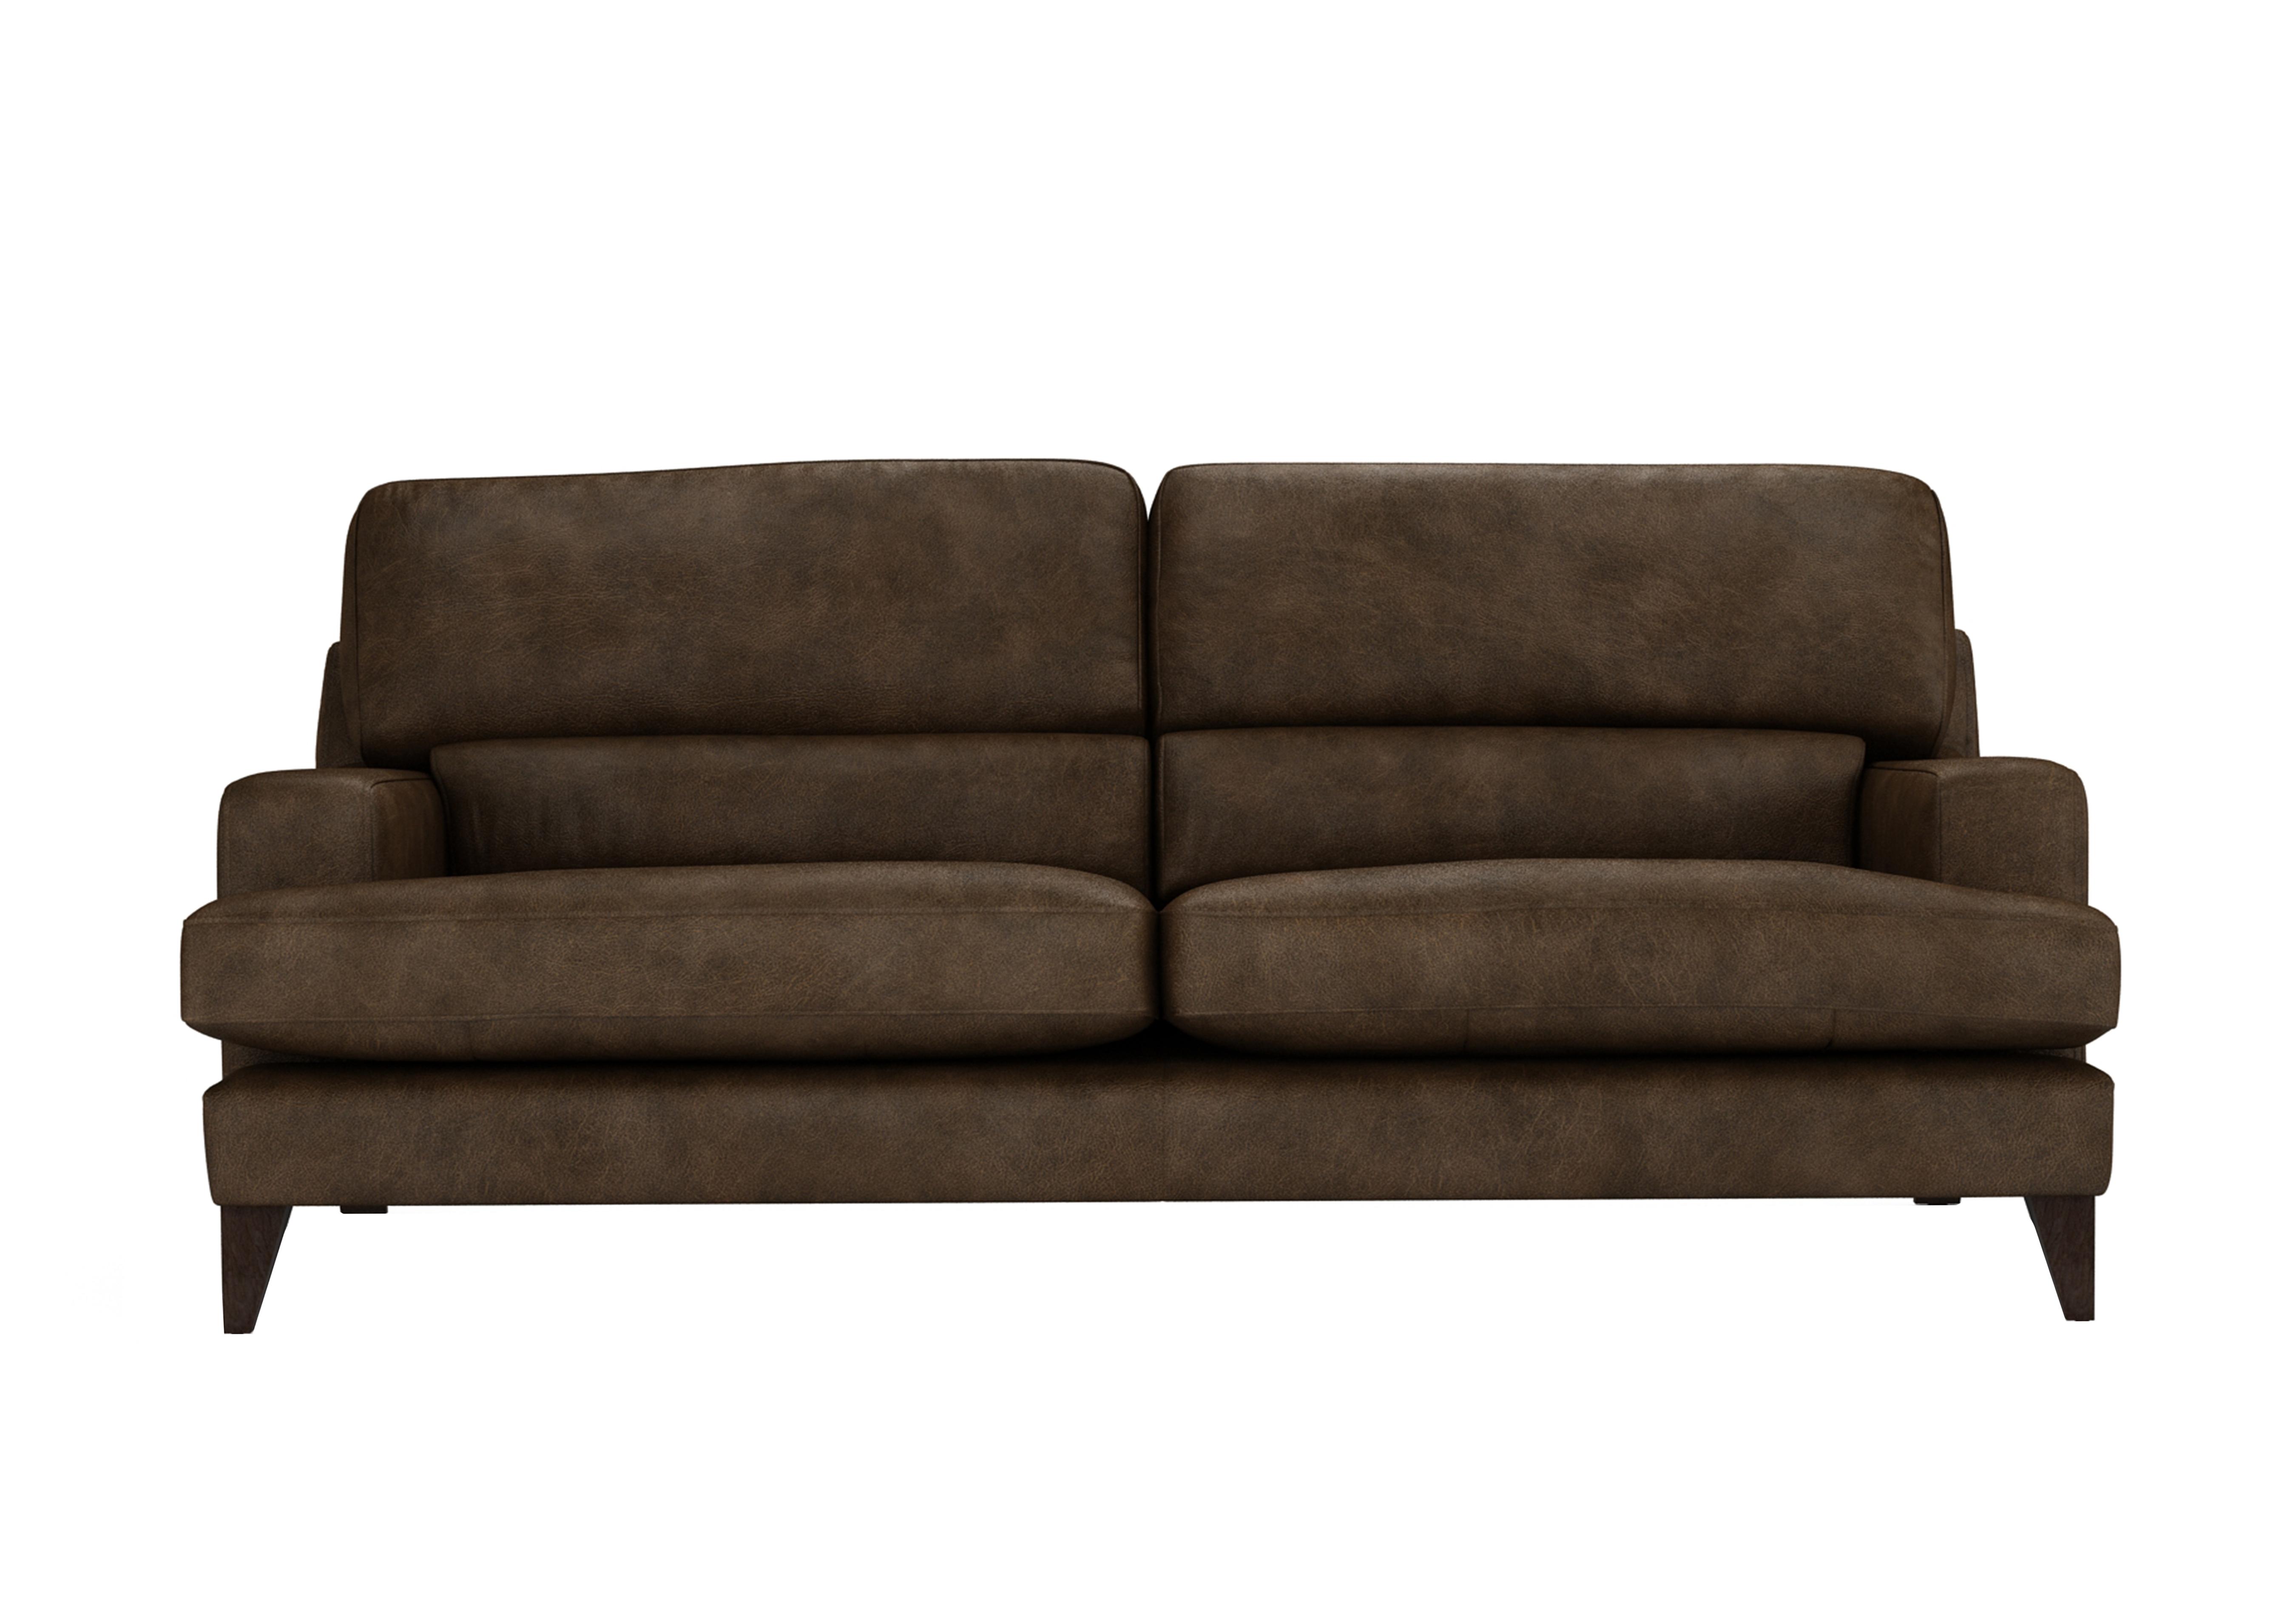 Romilly 4 Seater Leather Sofa in Bou192 Bourbon Wa Ft on Furniture Village